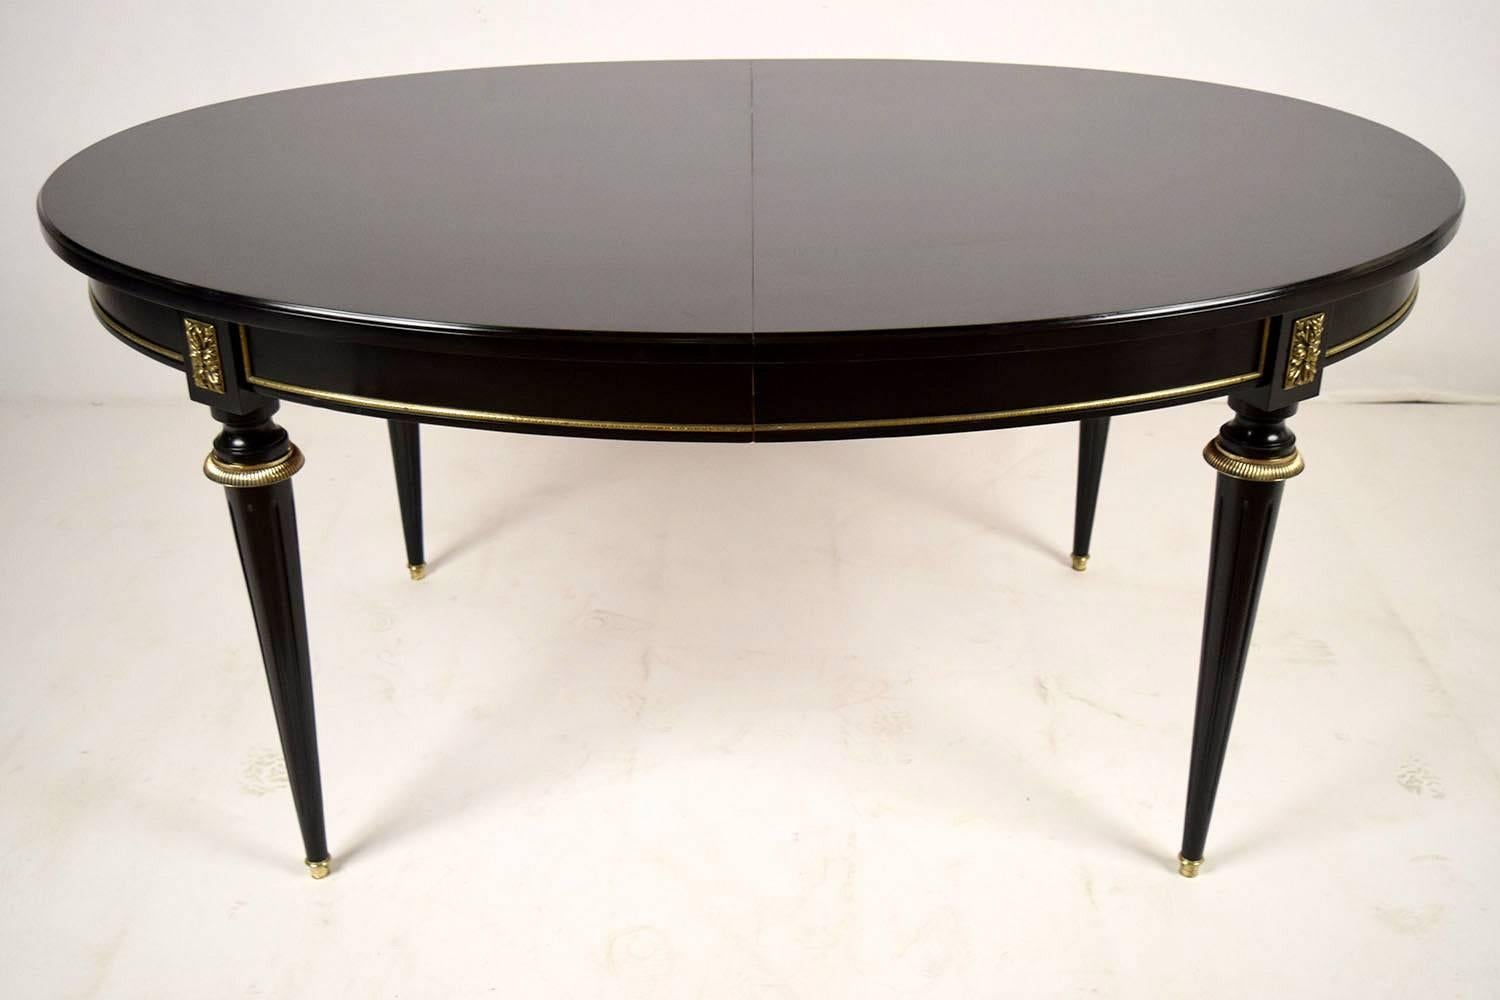 This 1910's French oval dining table is made of solid mahogany wood that has been finished using an ebonizing technique in a deep black color. Along the bottom edge of the table are brass mouldings and accents in each corner and along the long